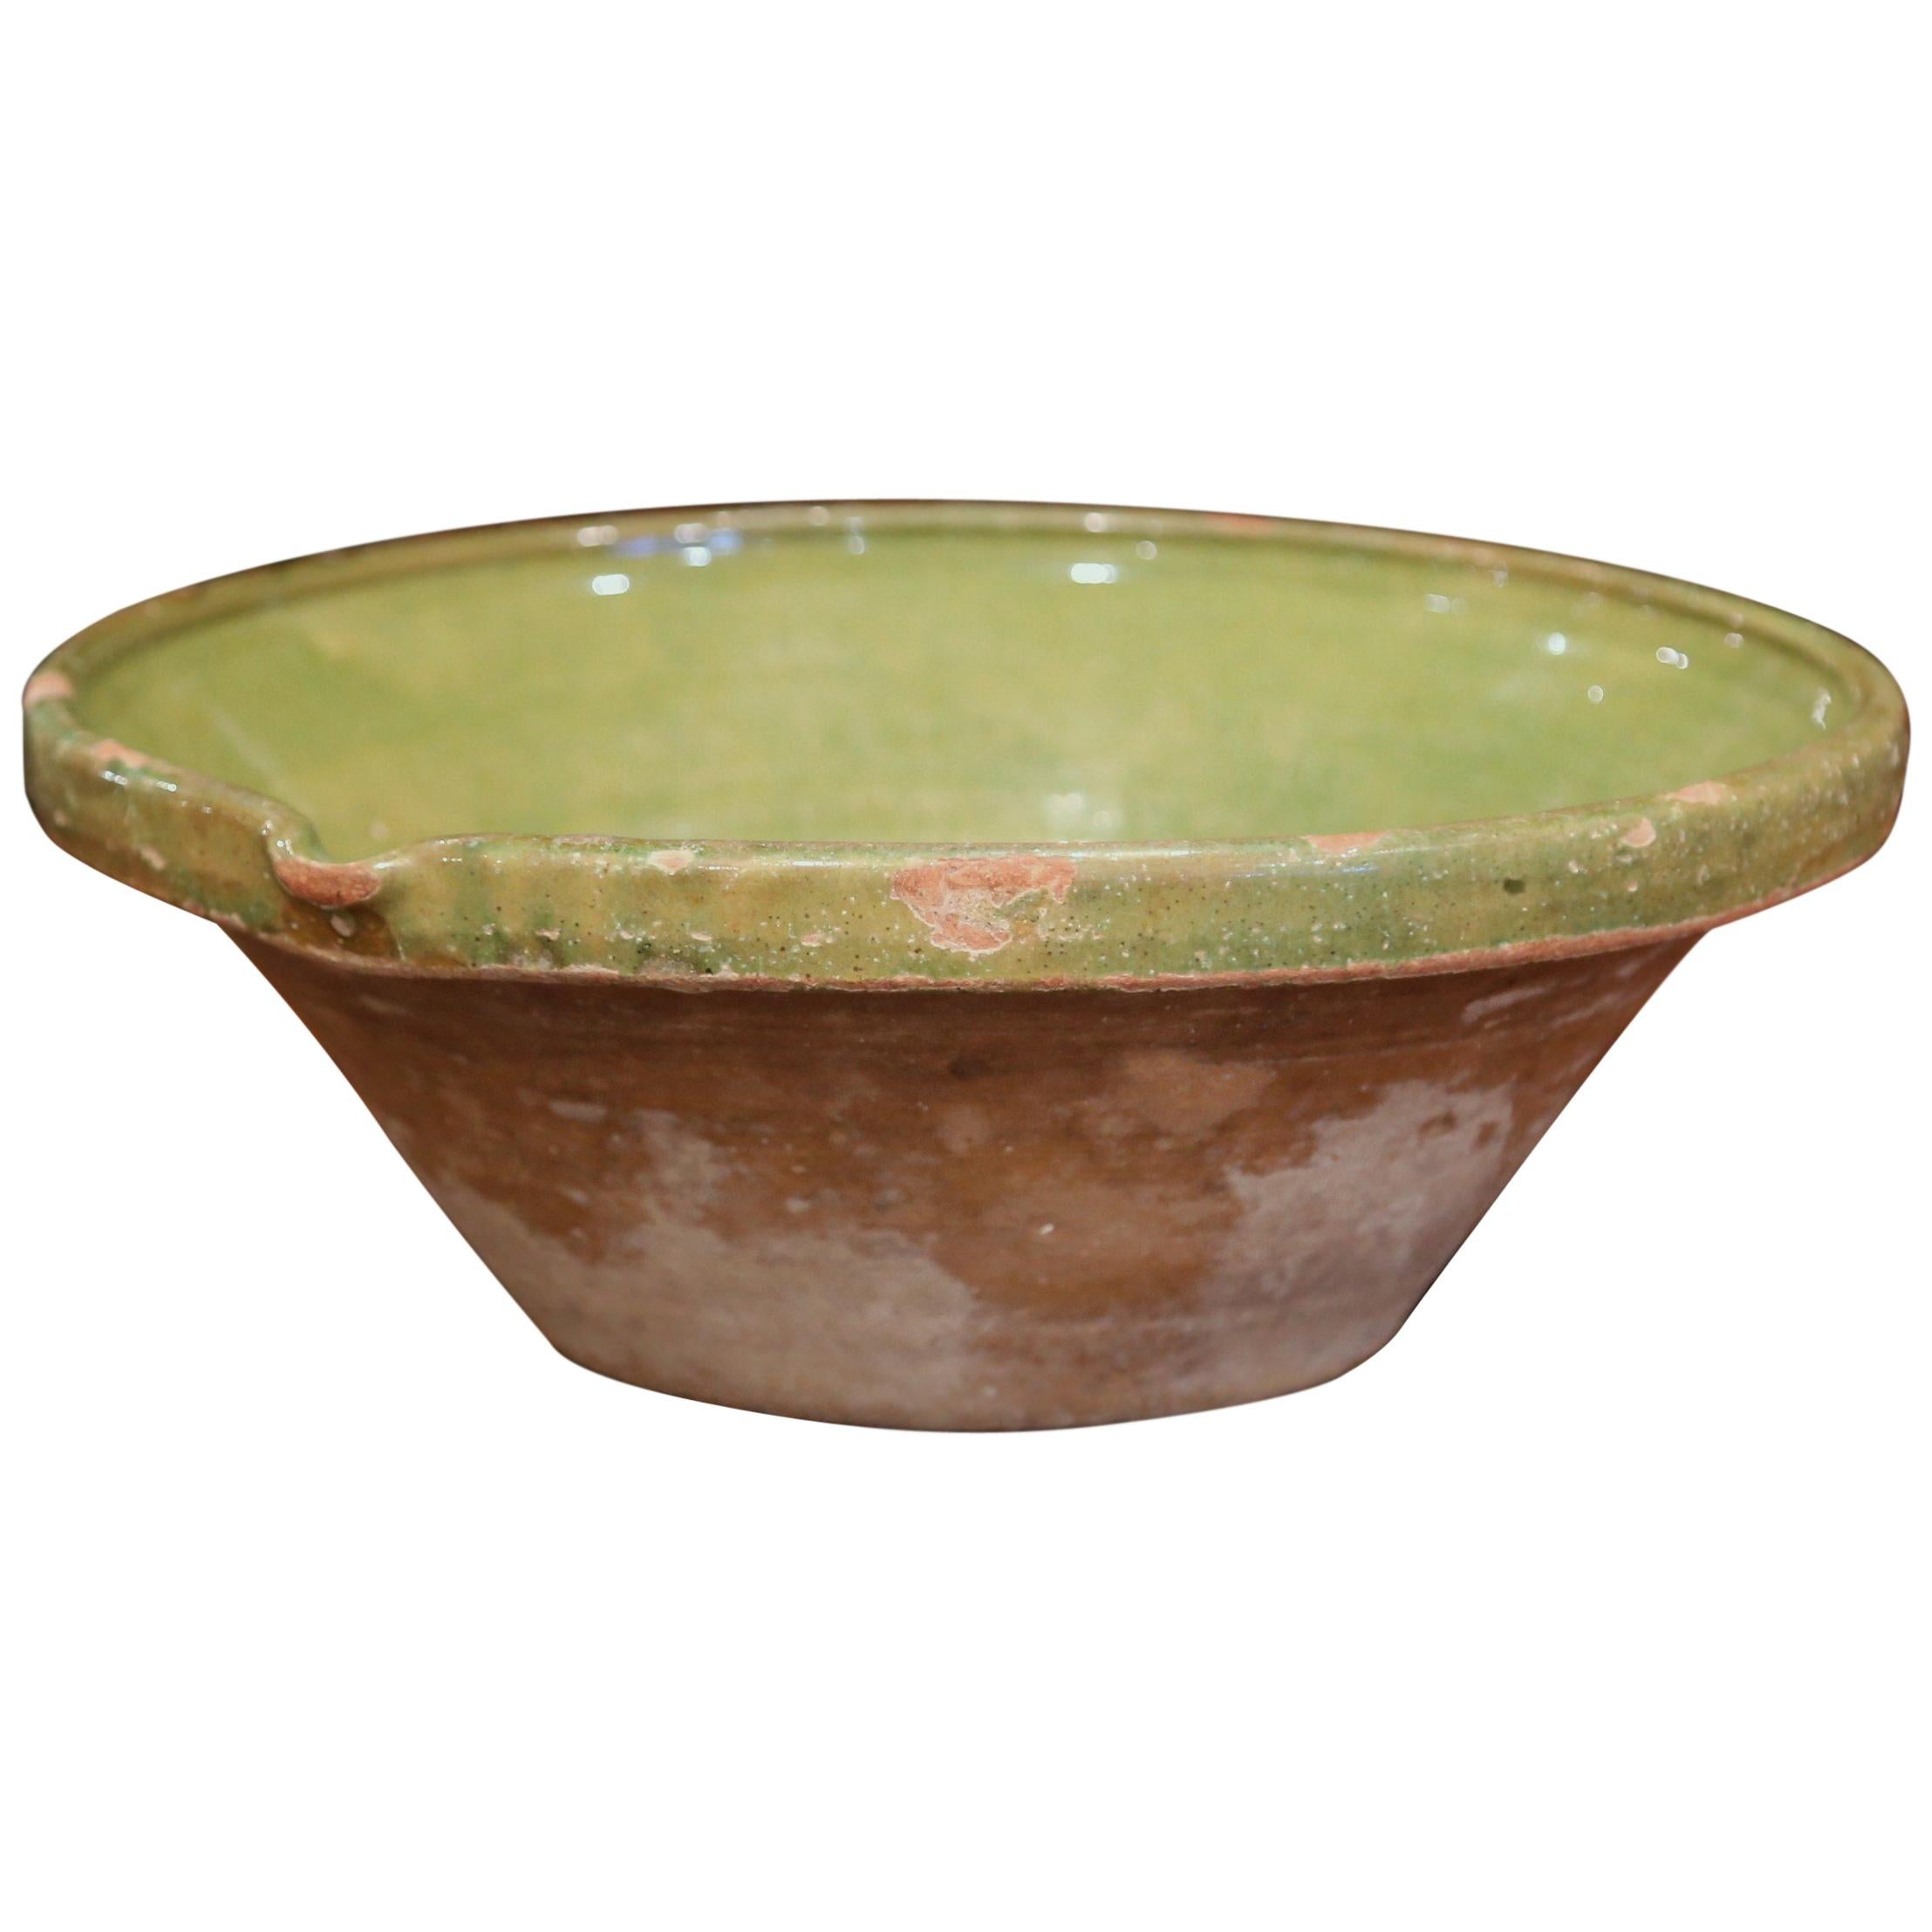 19th Century French Green Glazed Terracotta Decorative Bowl from Provence